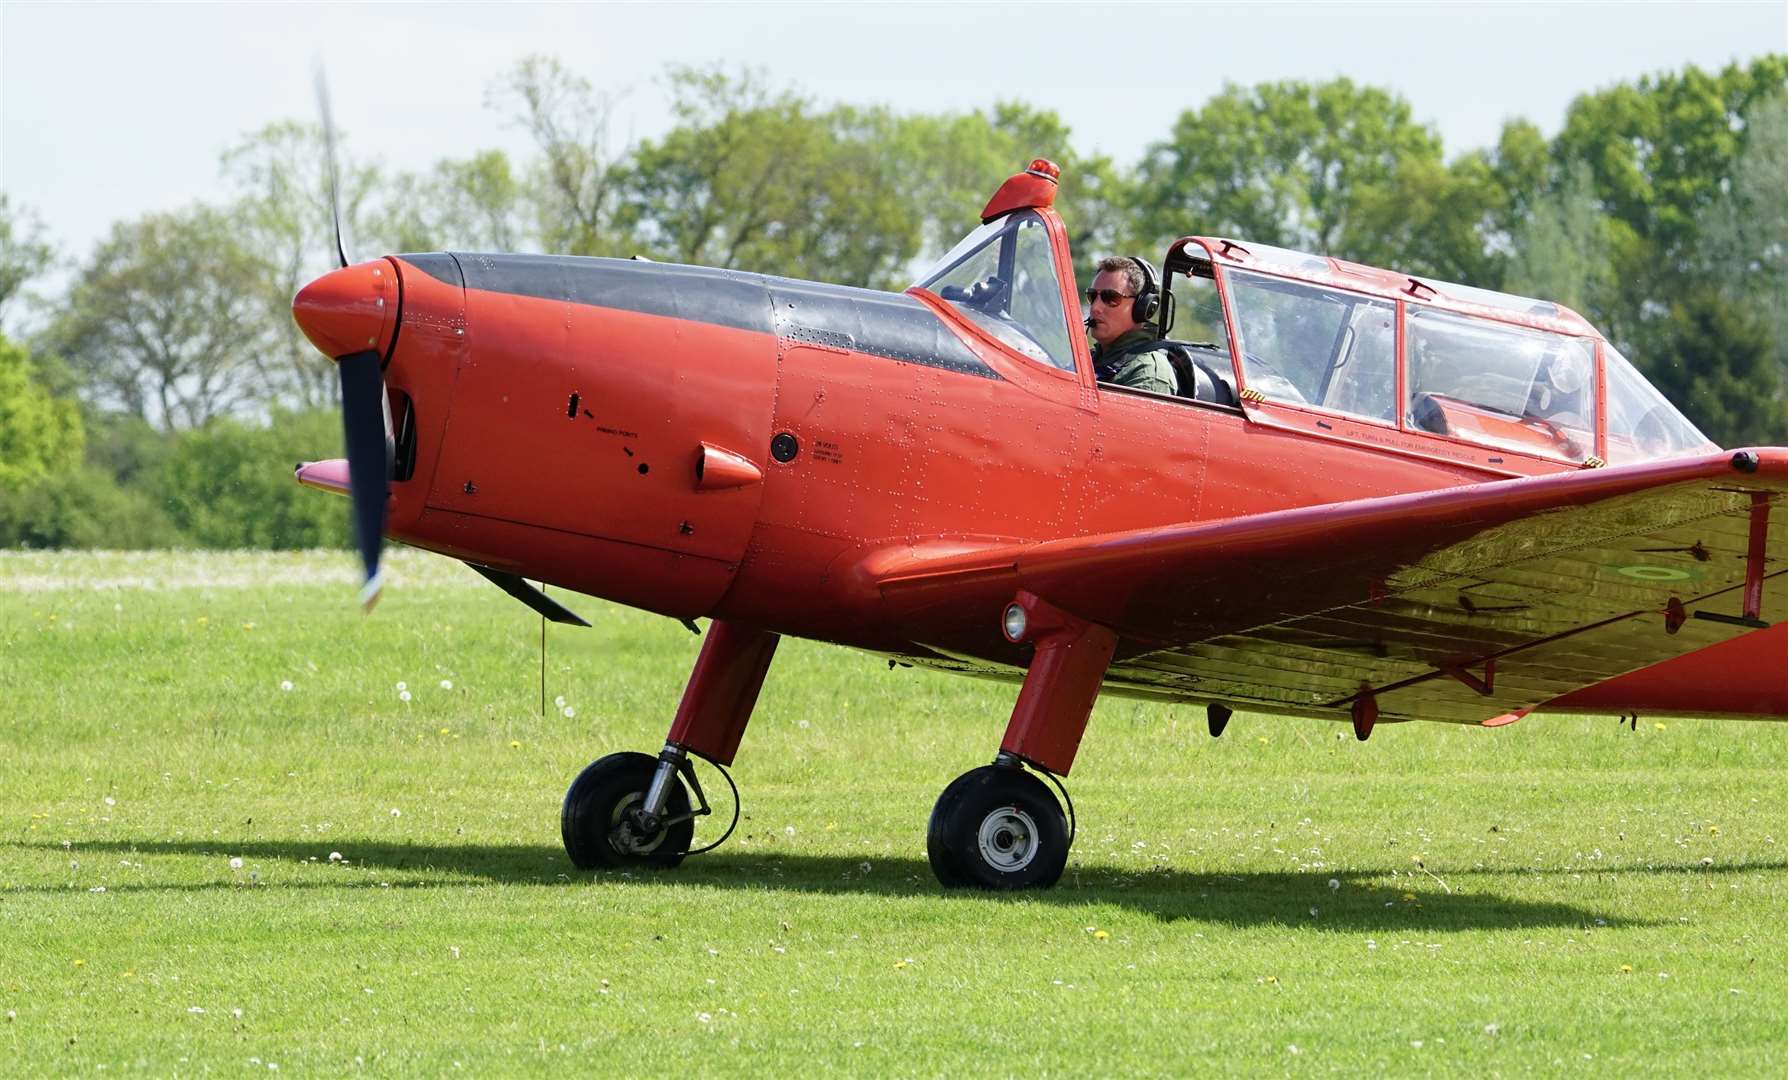 The de Havilland Chipmunk WP903, in which the-then Prince Charles learned how to fly in 969, will take to the air at Shuttleworth aerodrome near Bedford on Sunday (Hilton Holloway/PA)